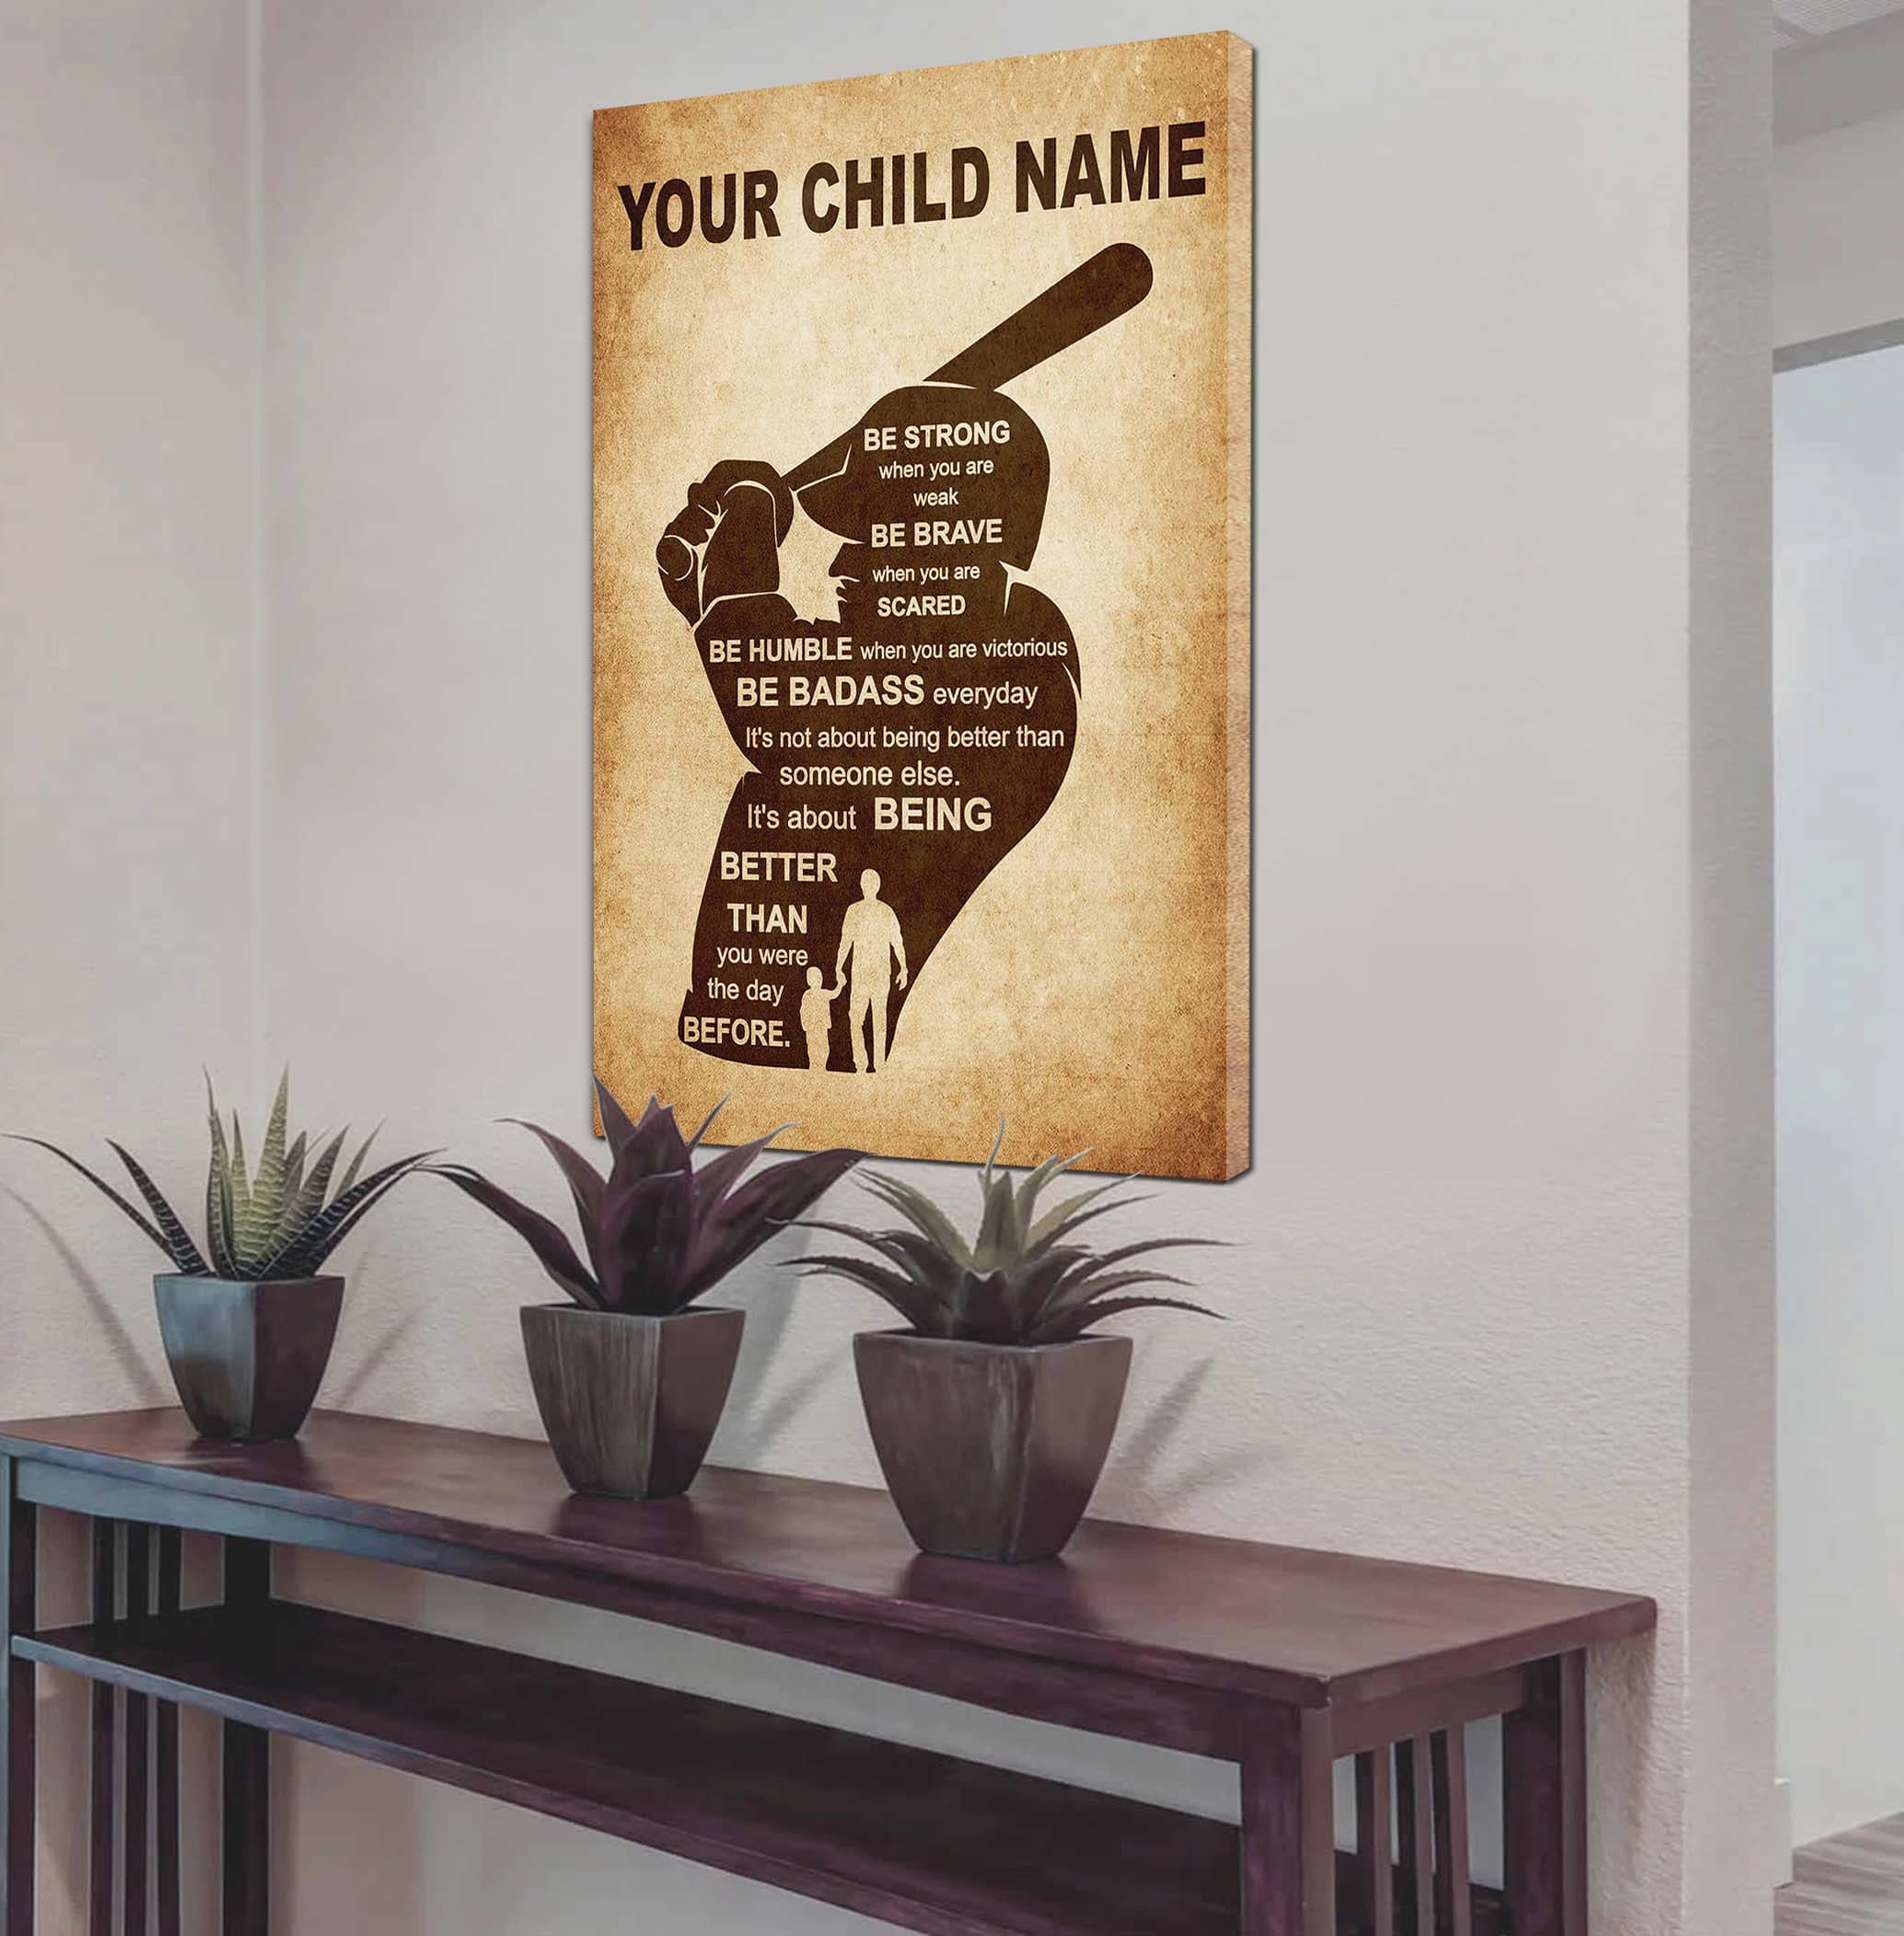 Basketball Personalized Your Child Name From Dad To Son Basketball Poster Canvas Be Strong When You Are Weak Be Brave When You Are Scared It's Not About Being Better Than Someone Else It's About Being Better Than You Were The Day Before